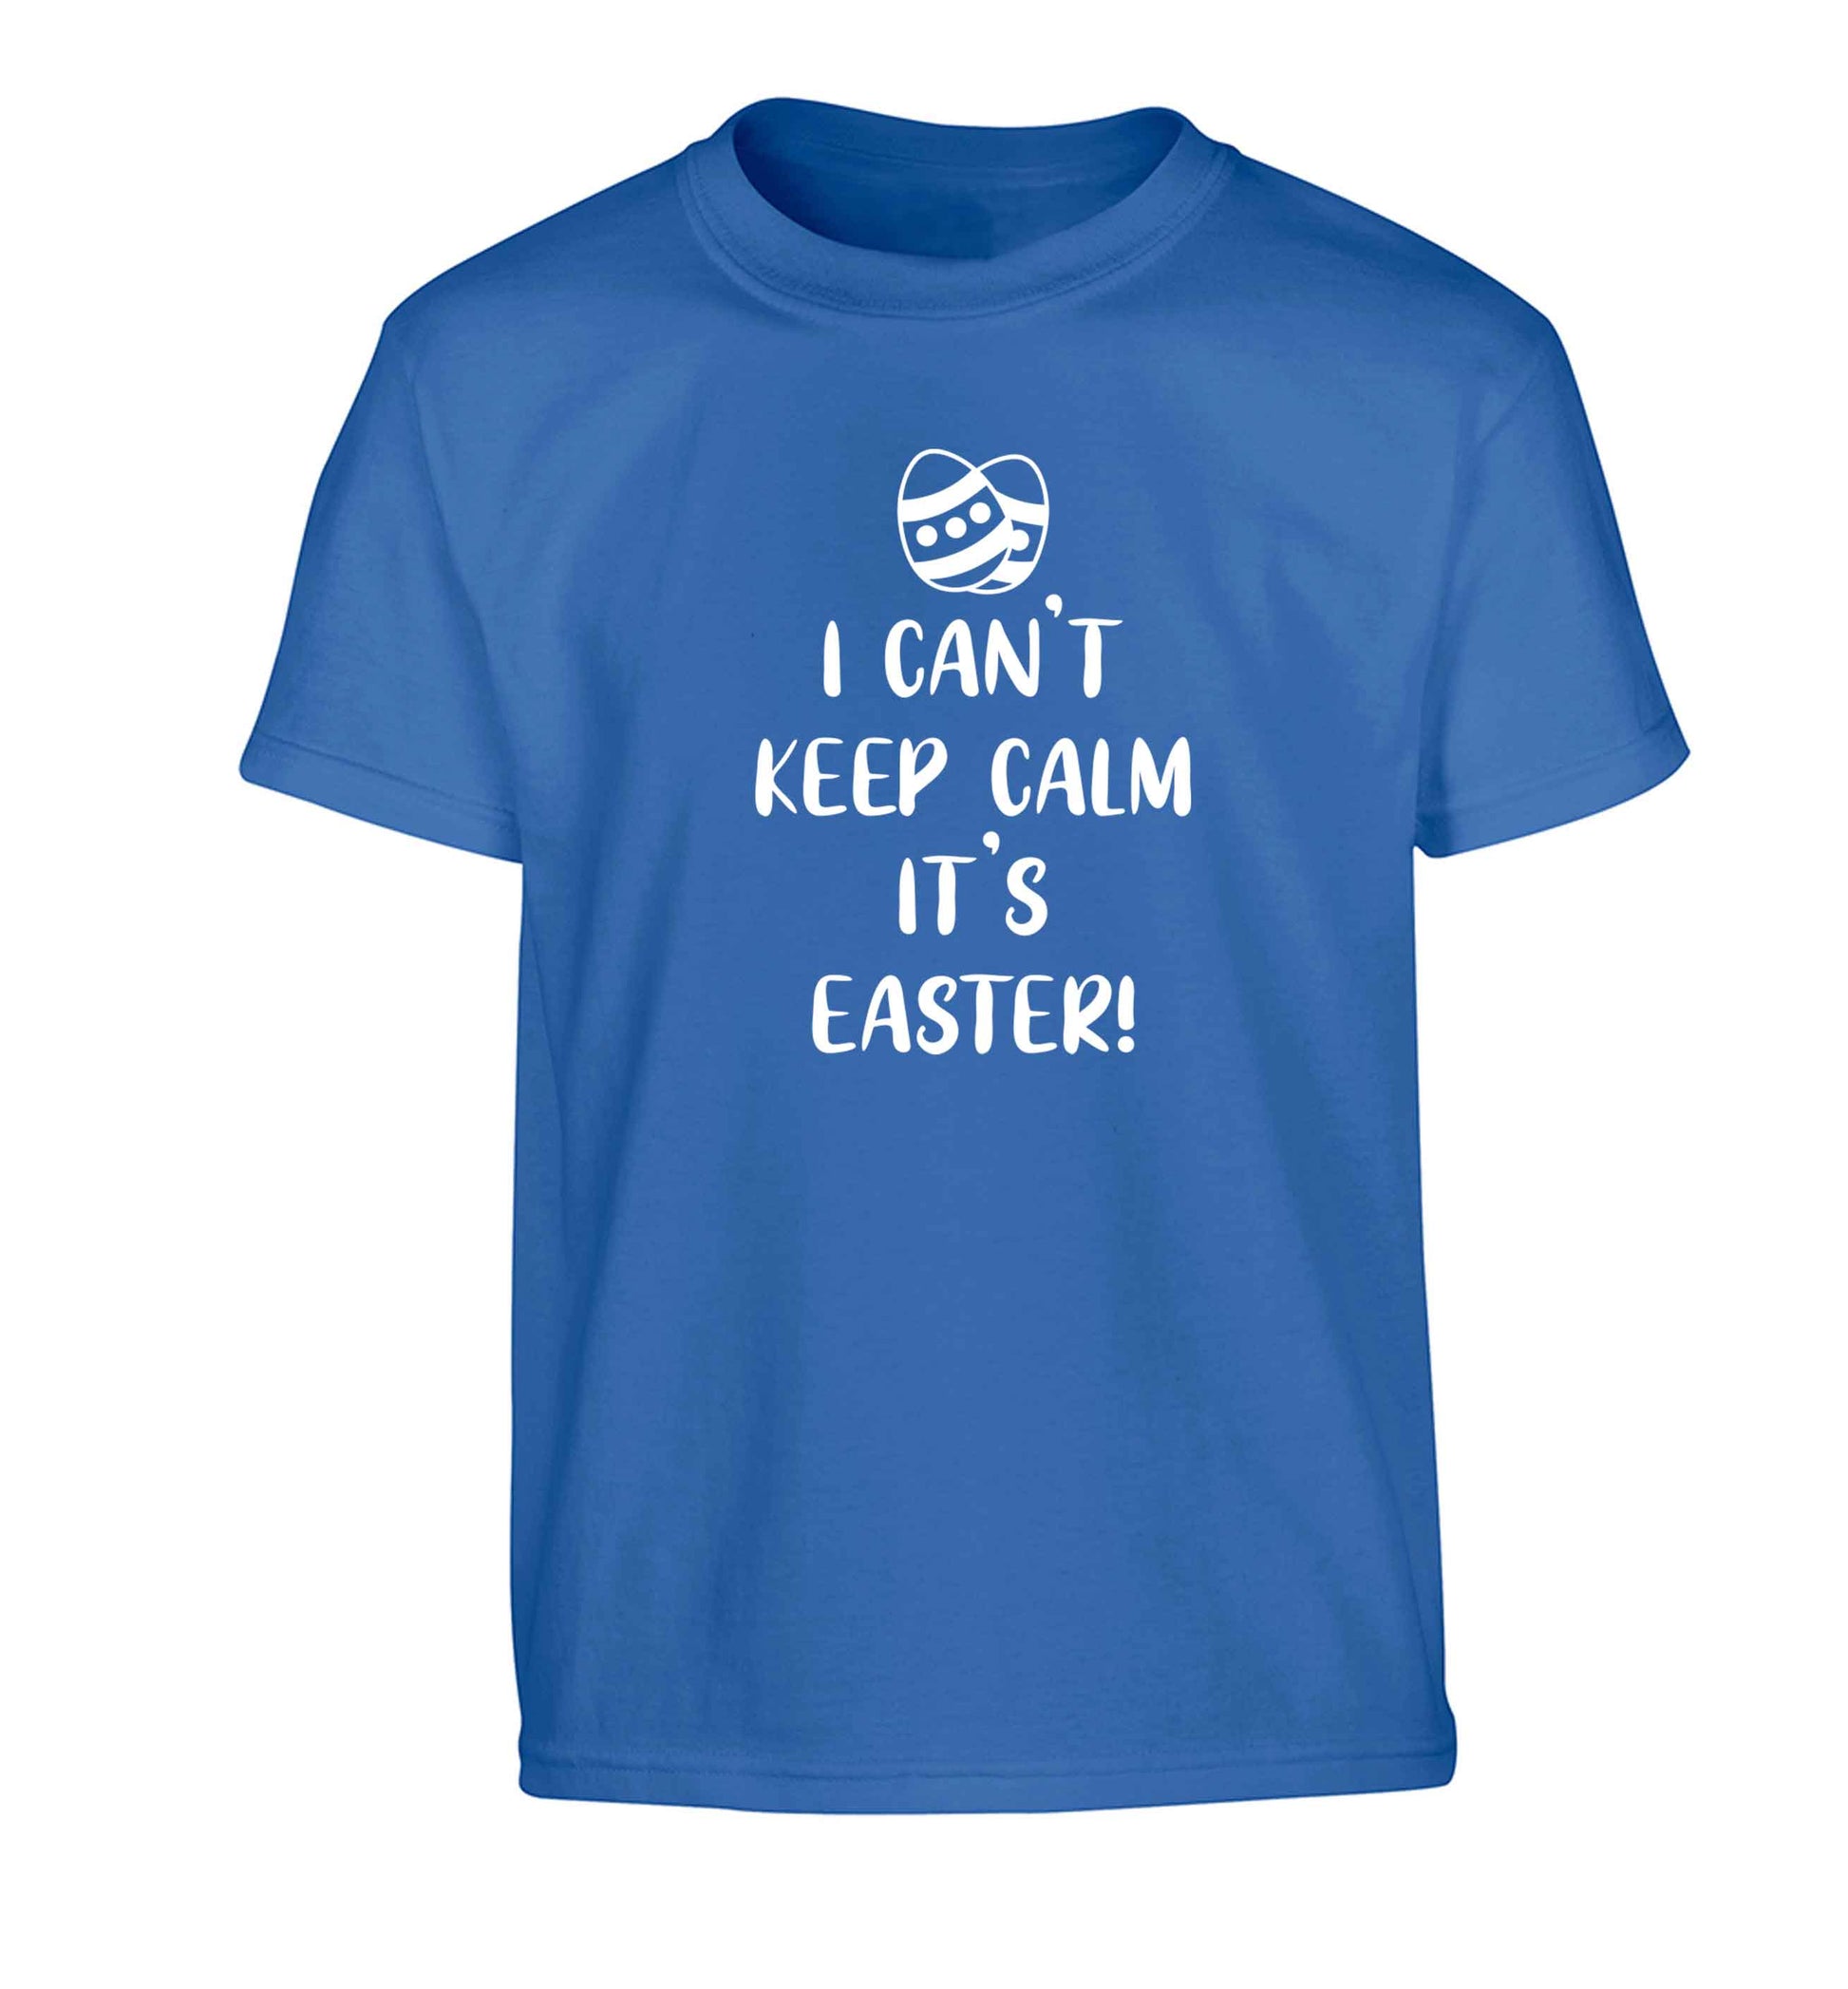 I can't keep calm it's Easter Children's blue Tshirt 12-13 Years